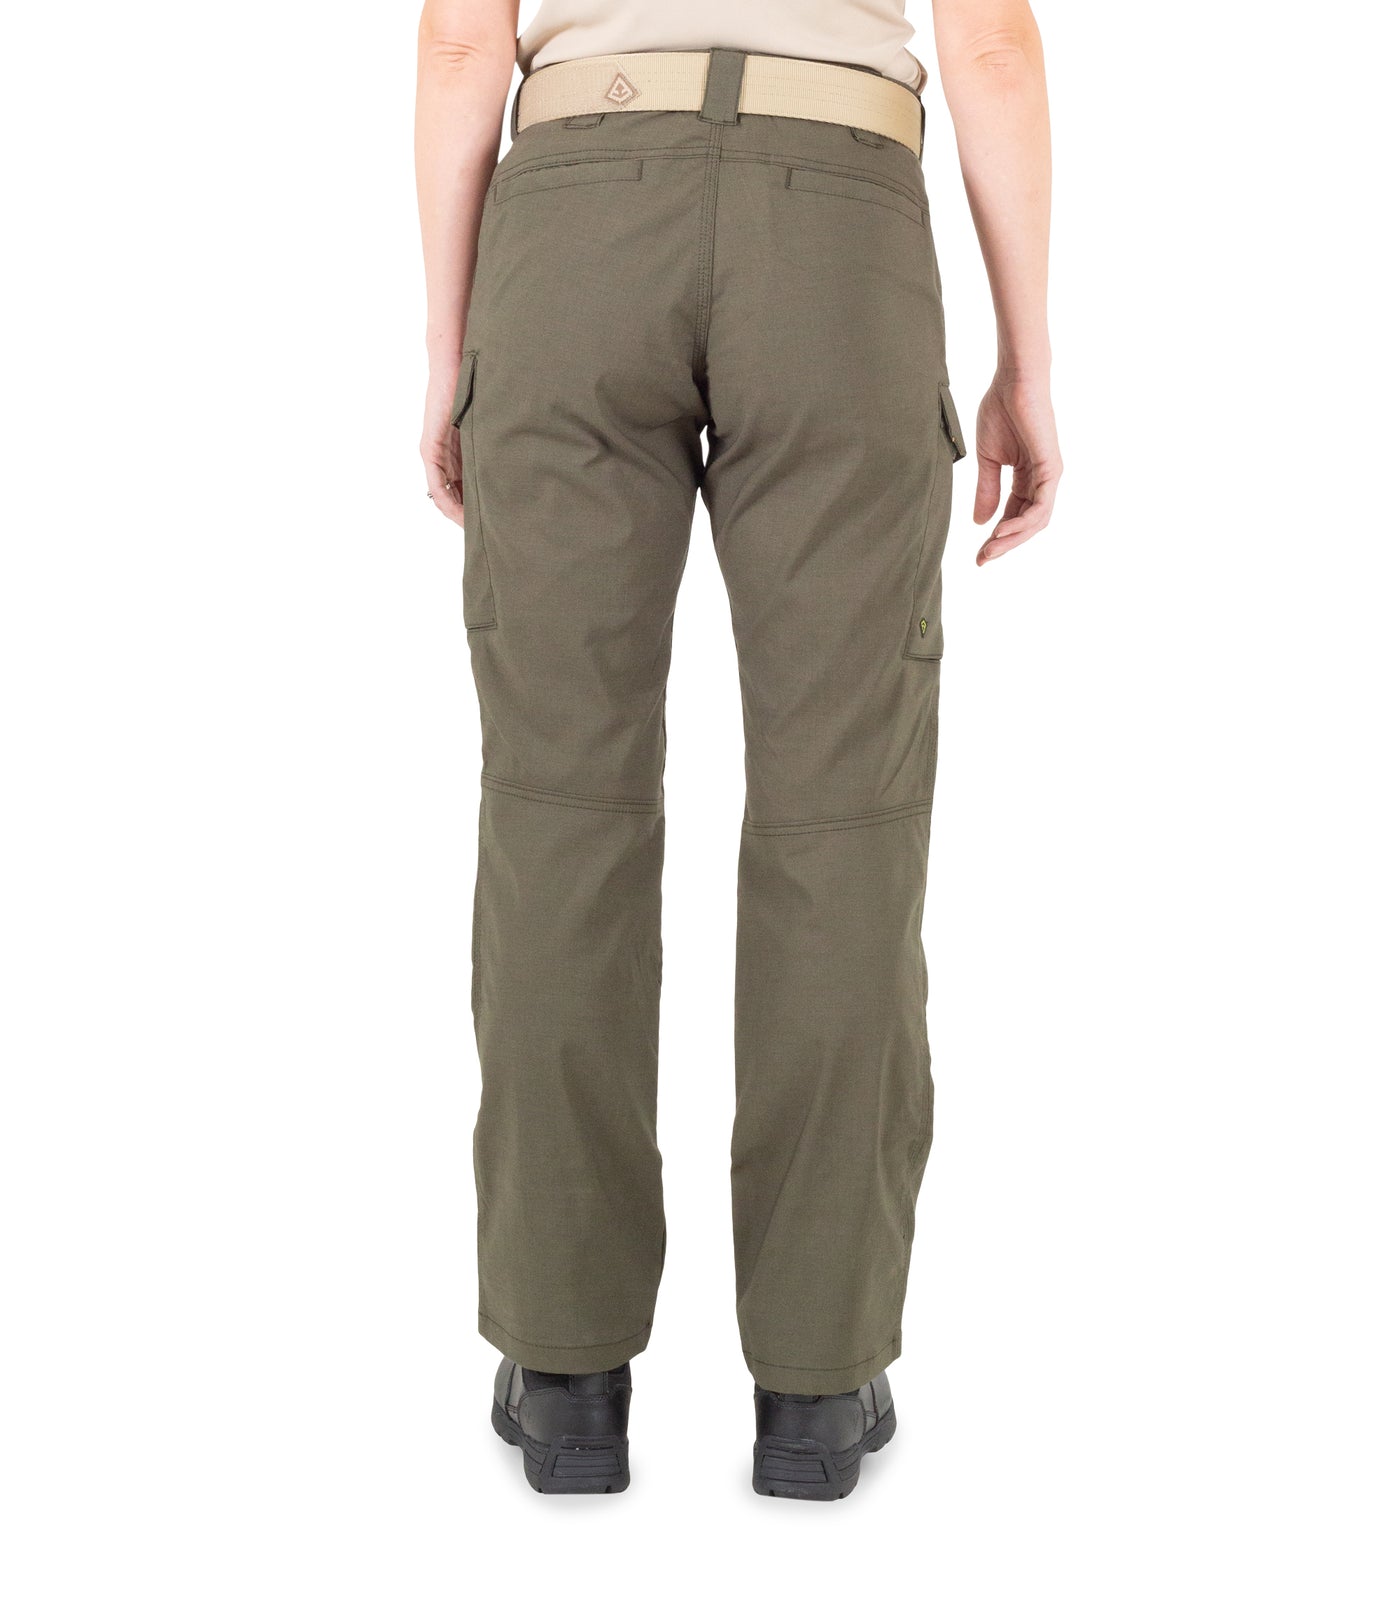 Back of Women's V2 Tactical Pants in OD Green